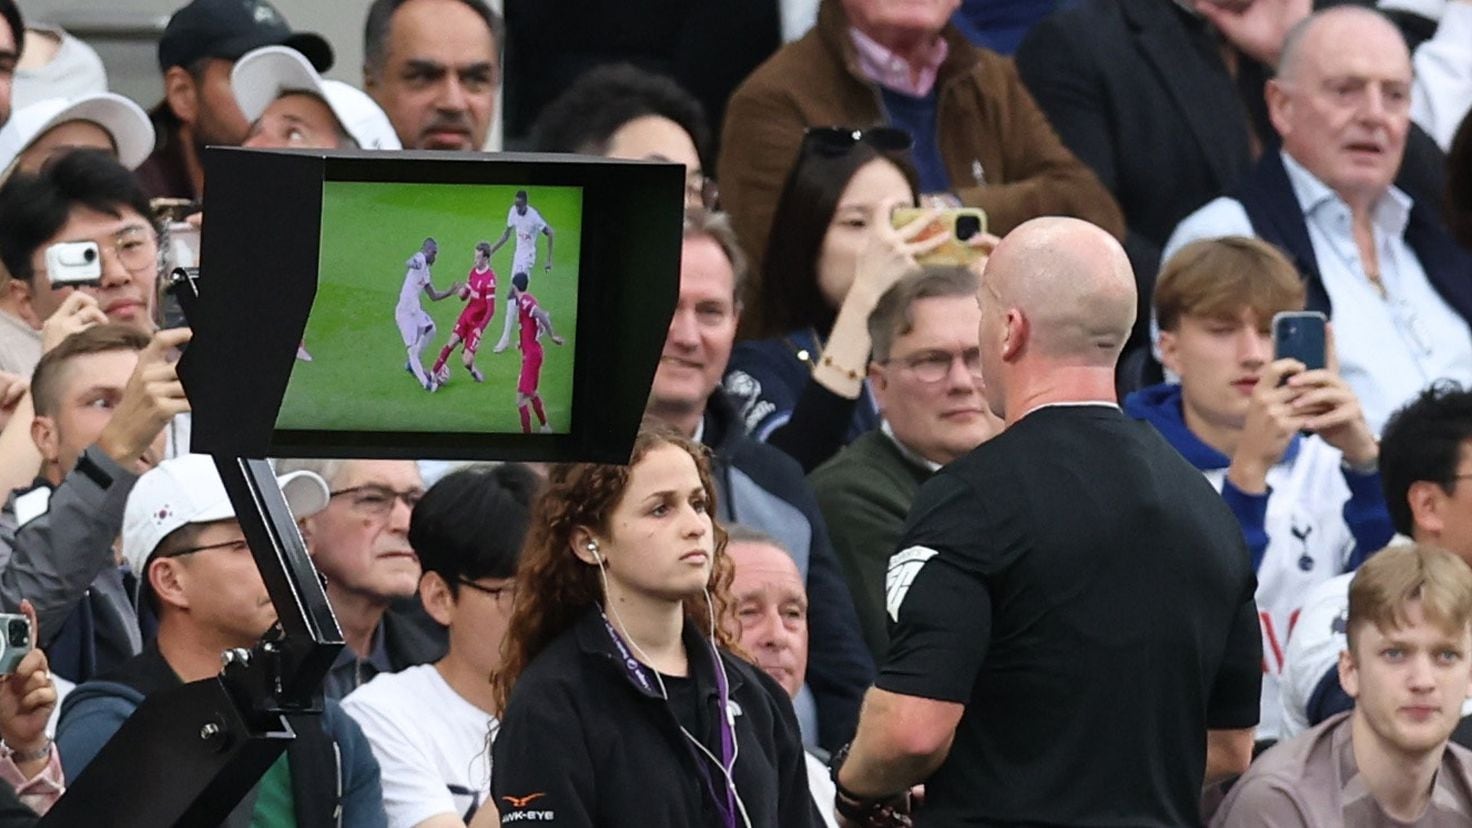 PGMOL and Premier League to release match officials’ and VAR audio